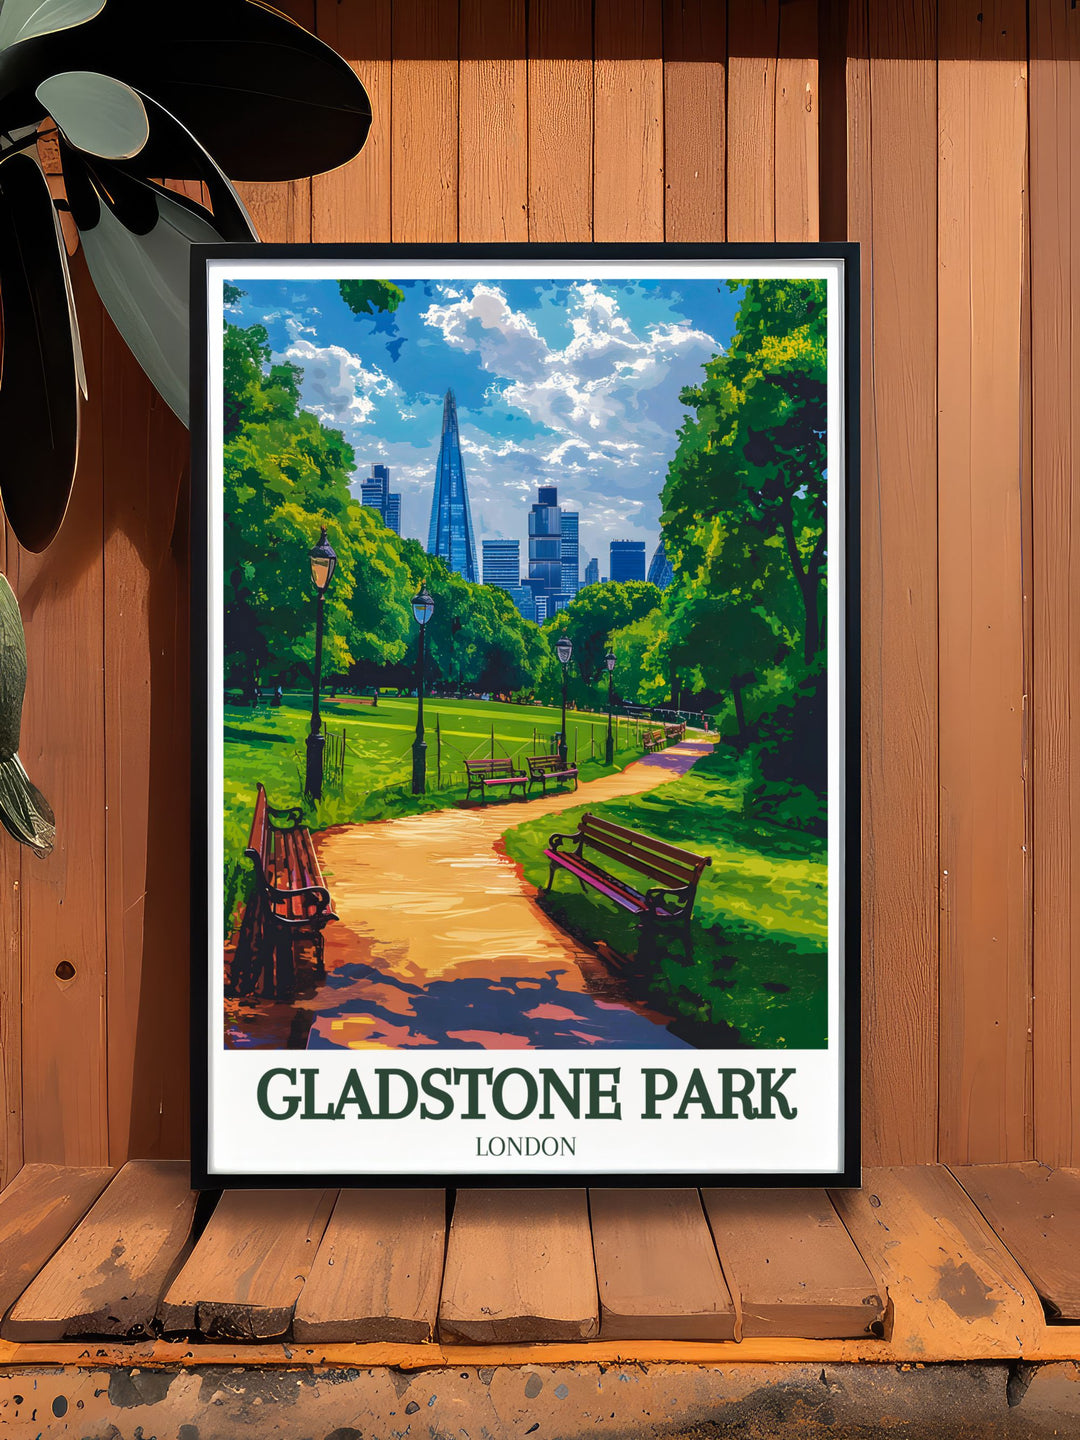 Framed art of Gladstone Park, emphasizing lush landscapes and serene atmosphere, perfect for those who love the natural beauty and historical significance of London parks.